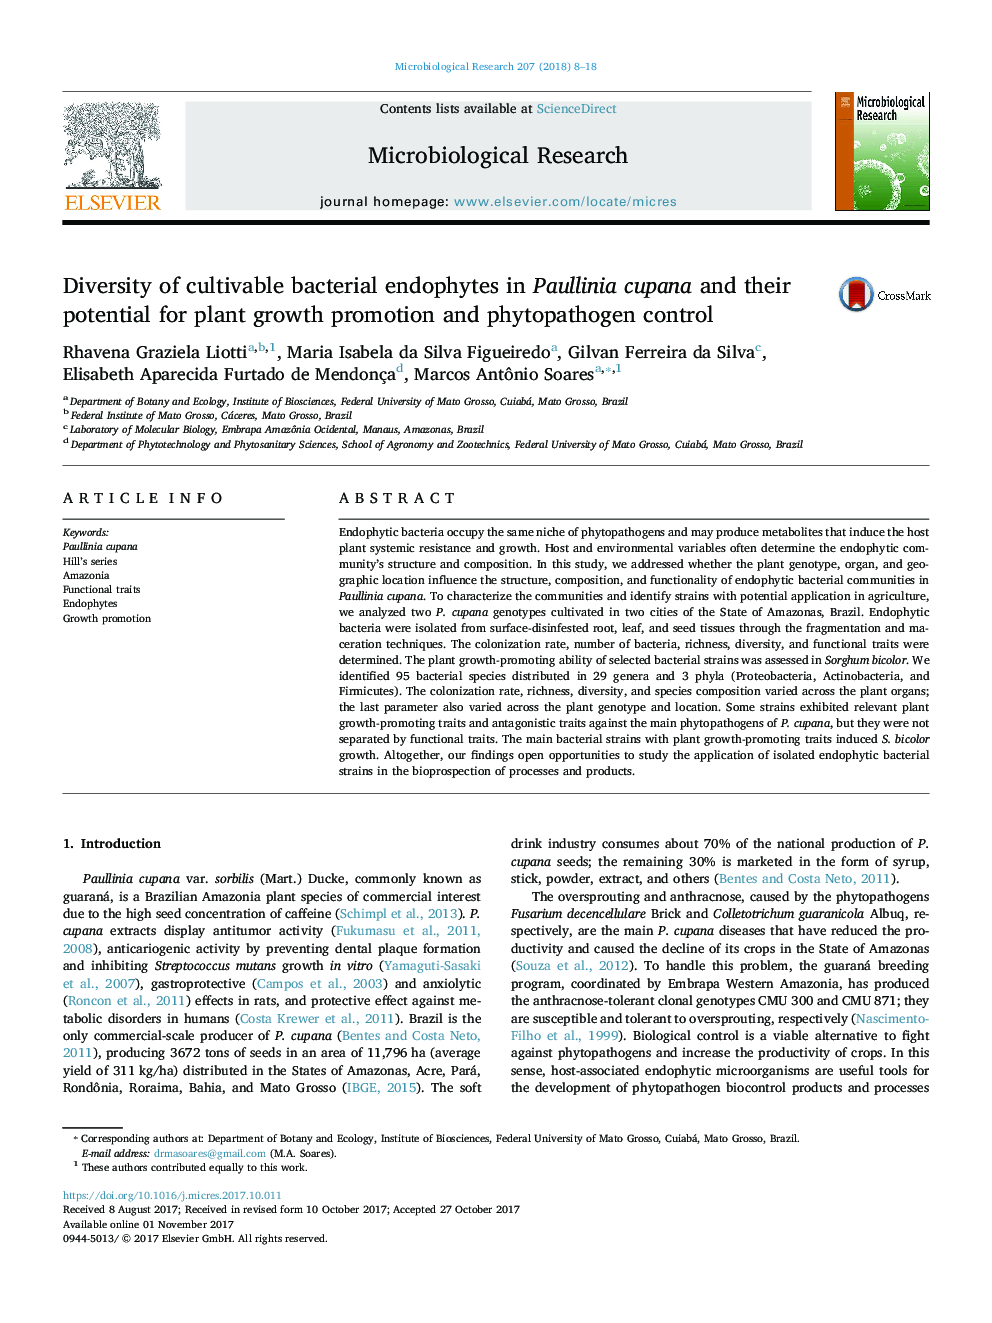 Diversity of cultivable bacterial endophytes in Paullinia cupana and their potential for plant growth promotion and phytopathogen control